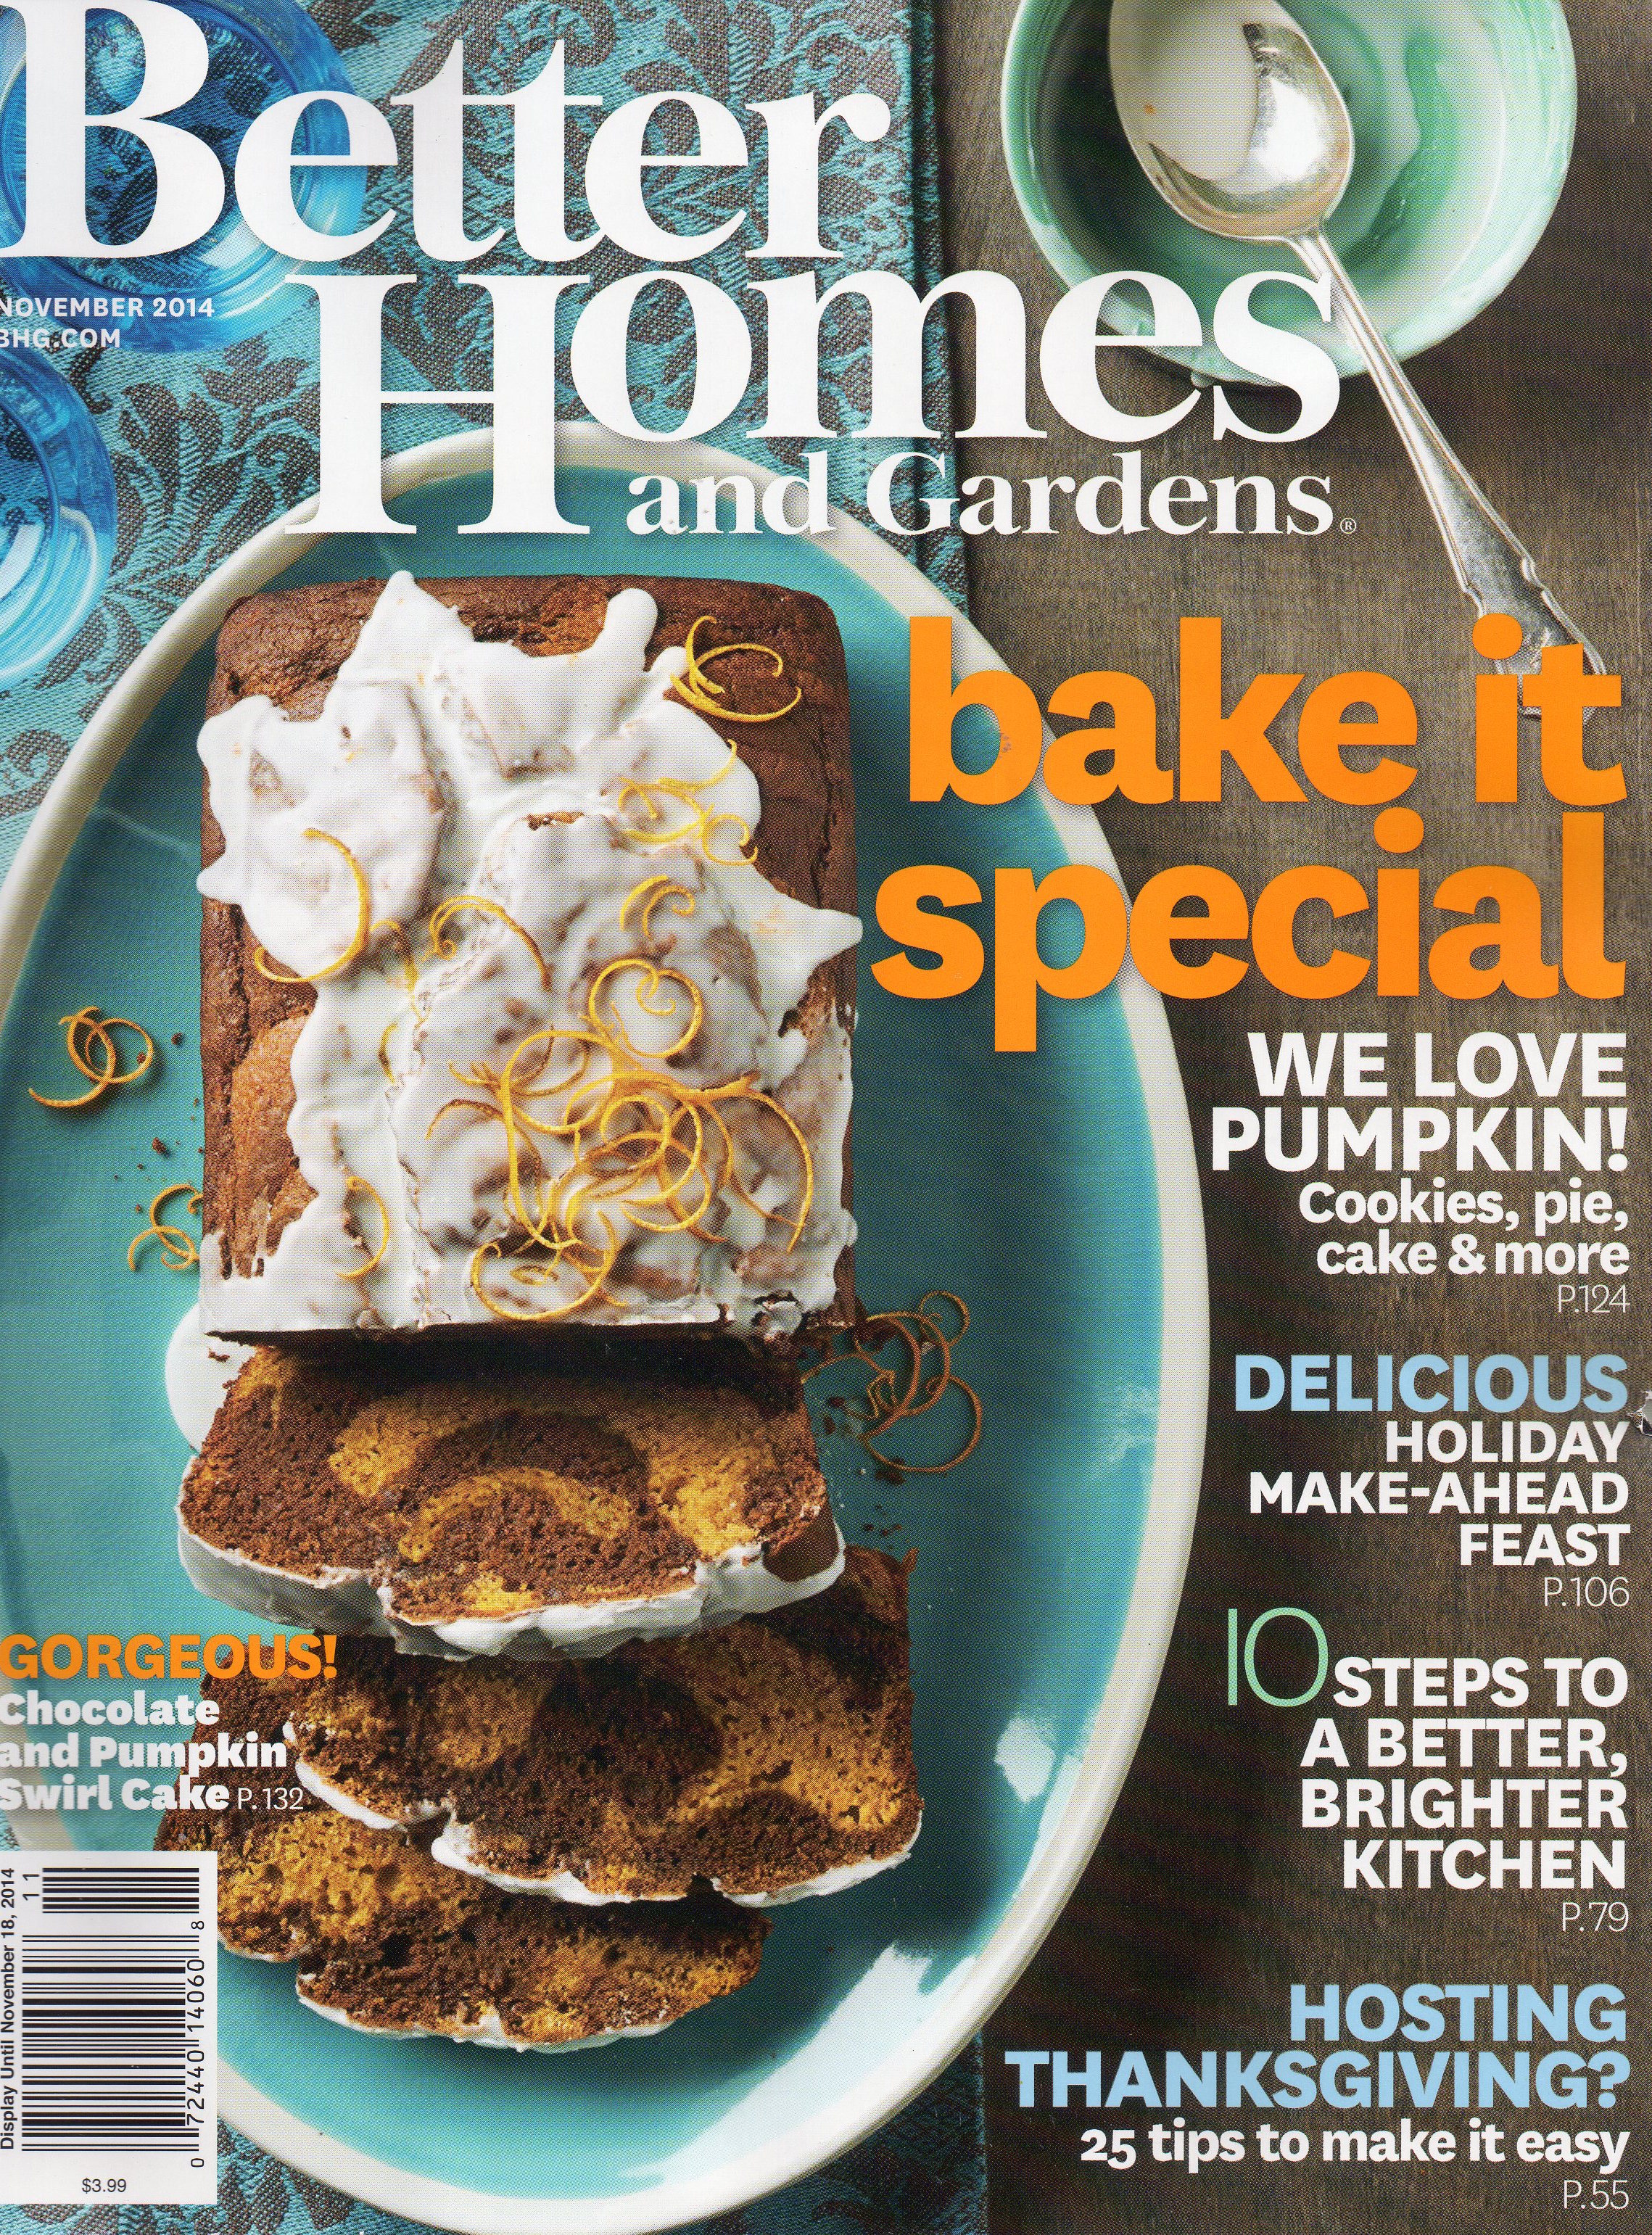 BarreAmped featured in Better Homes & Gardens